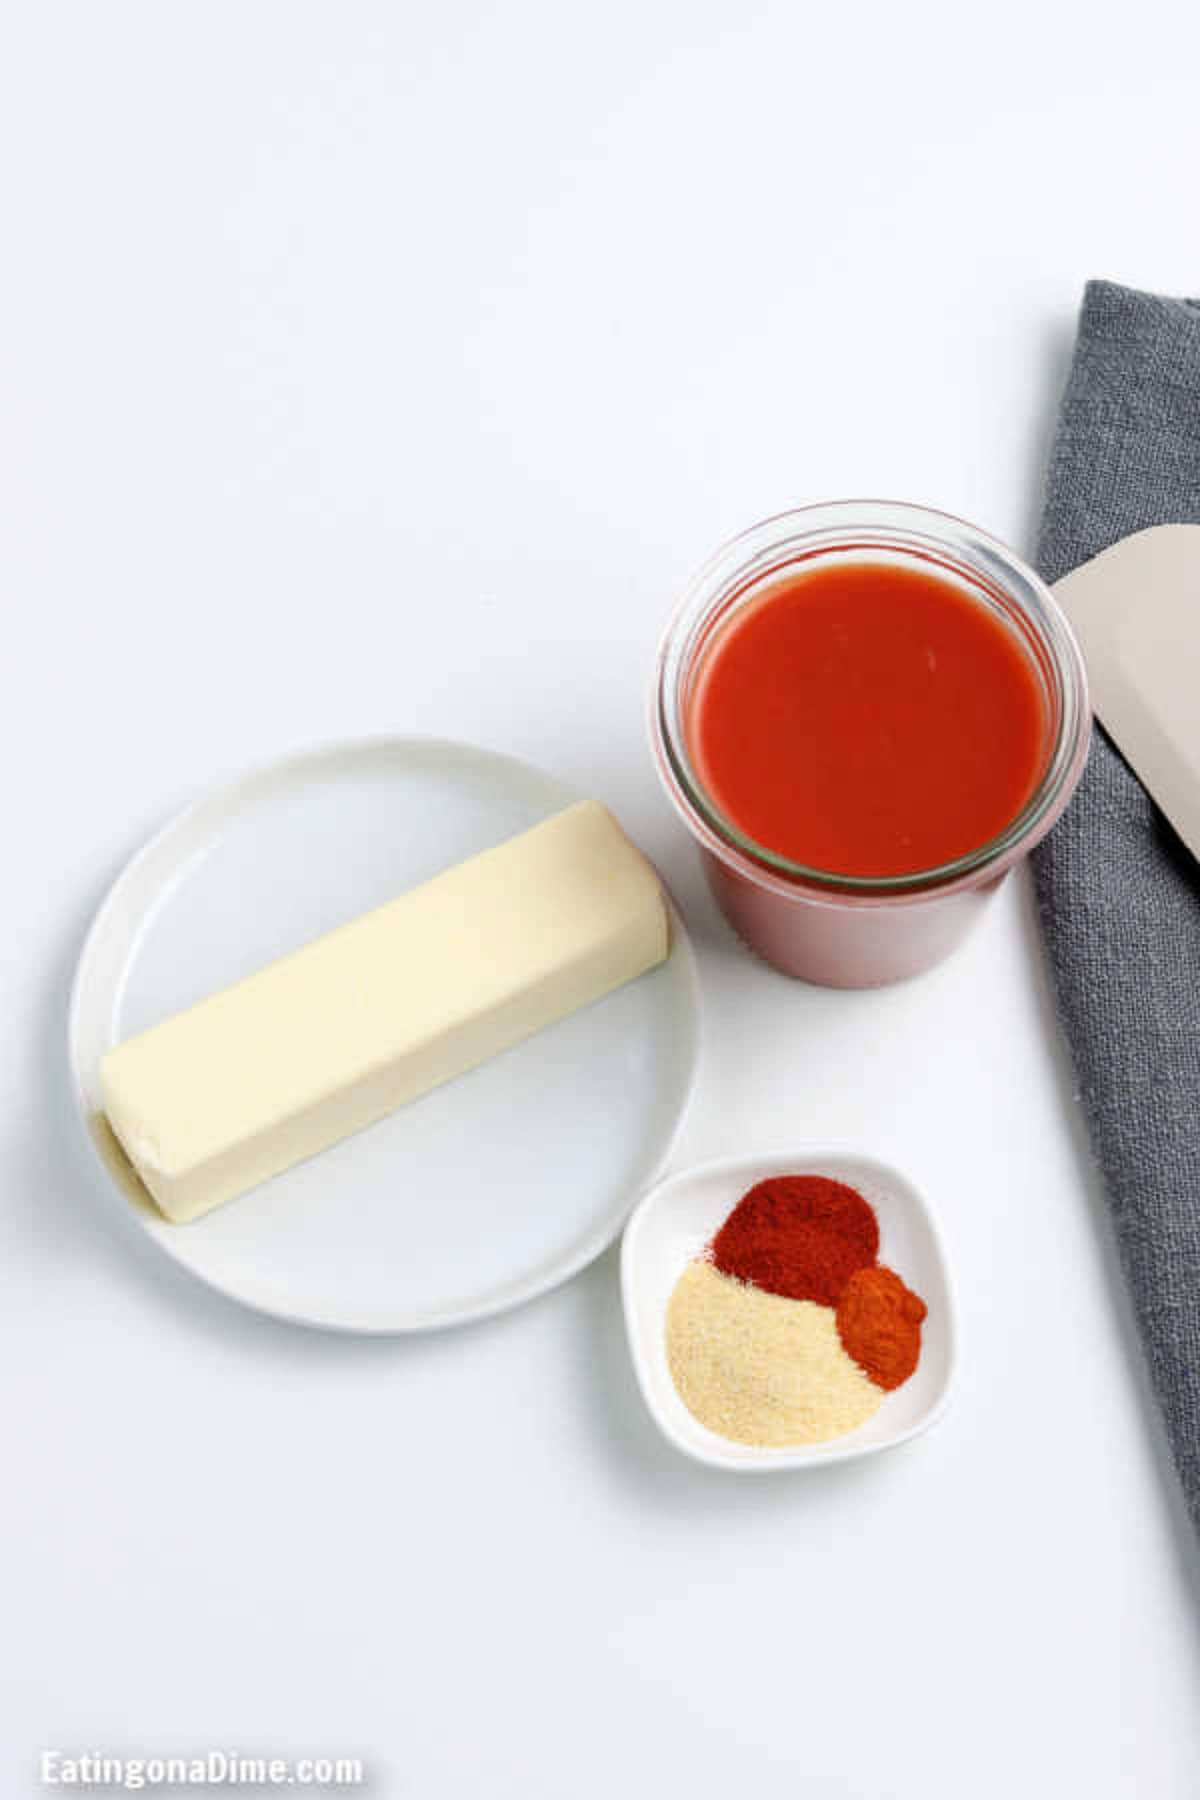 Ingredients to make easy homemade  buffalo sauce: hot sauce, unsalted butter, garlic powder, paprika and cayenne pepper 